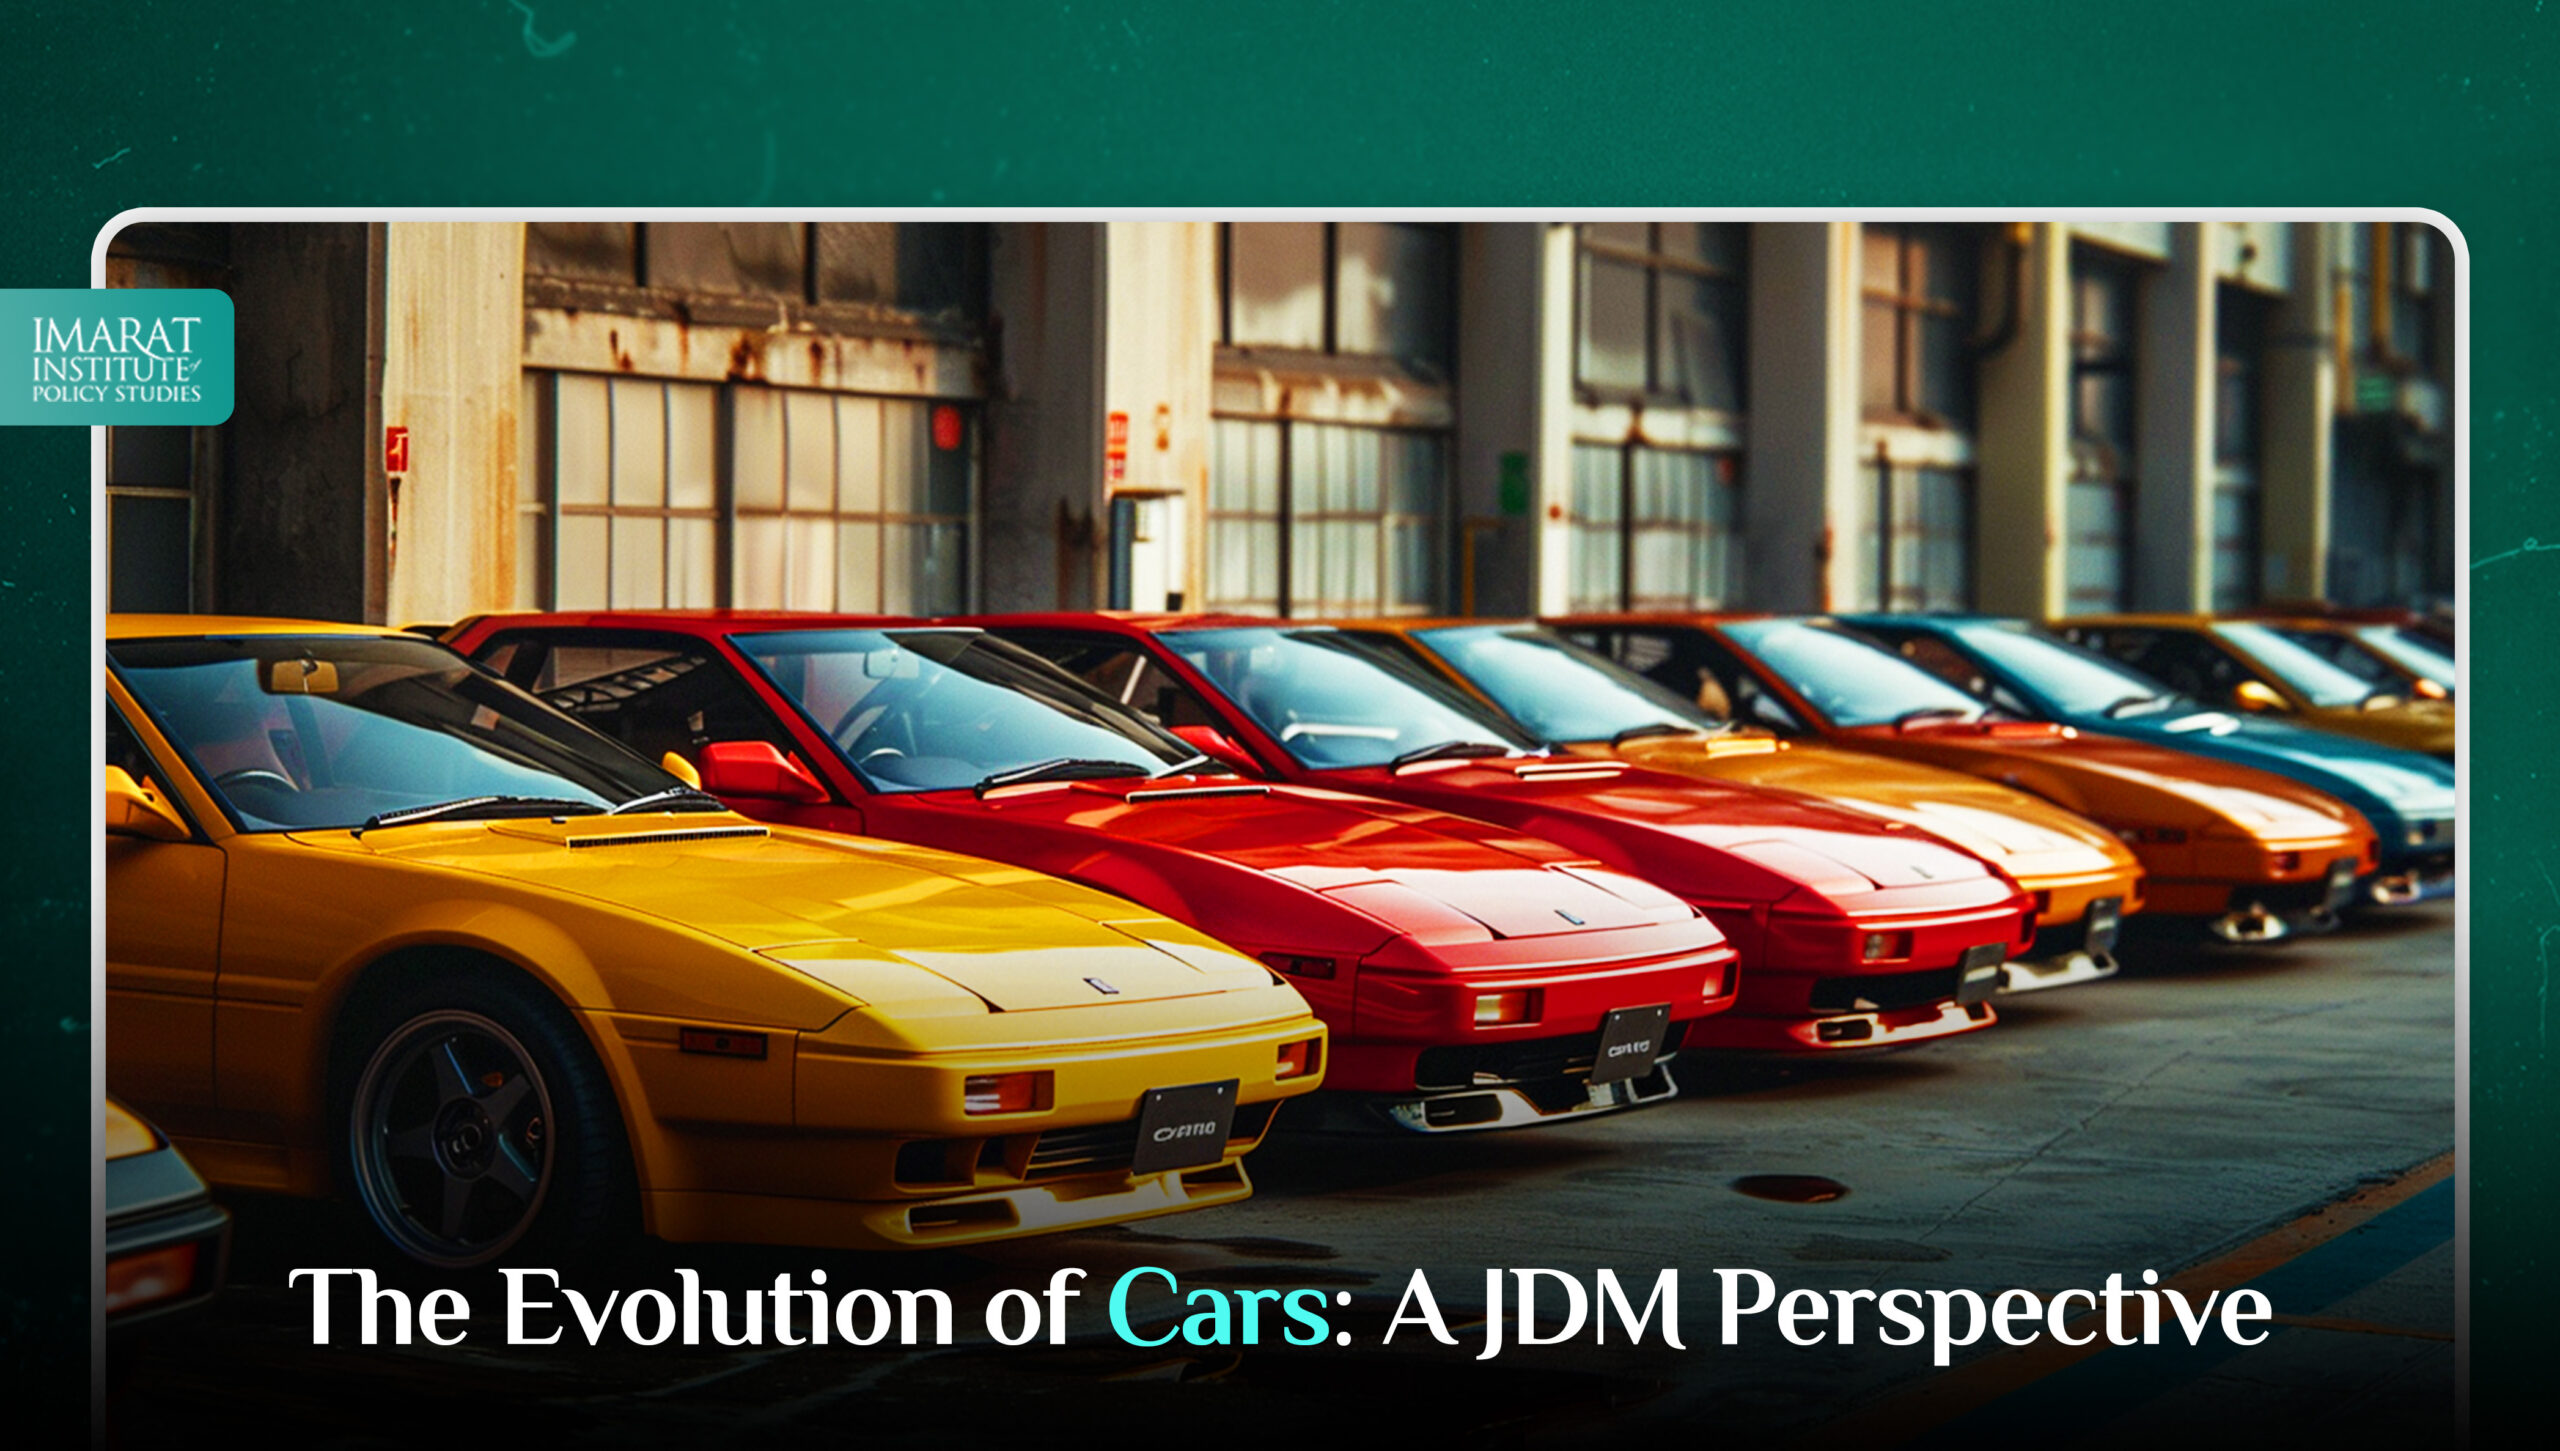 The Evolution of Cars: A JDM Perspective